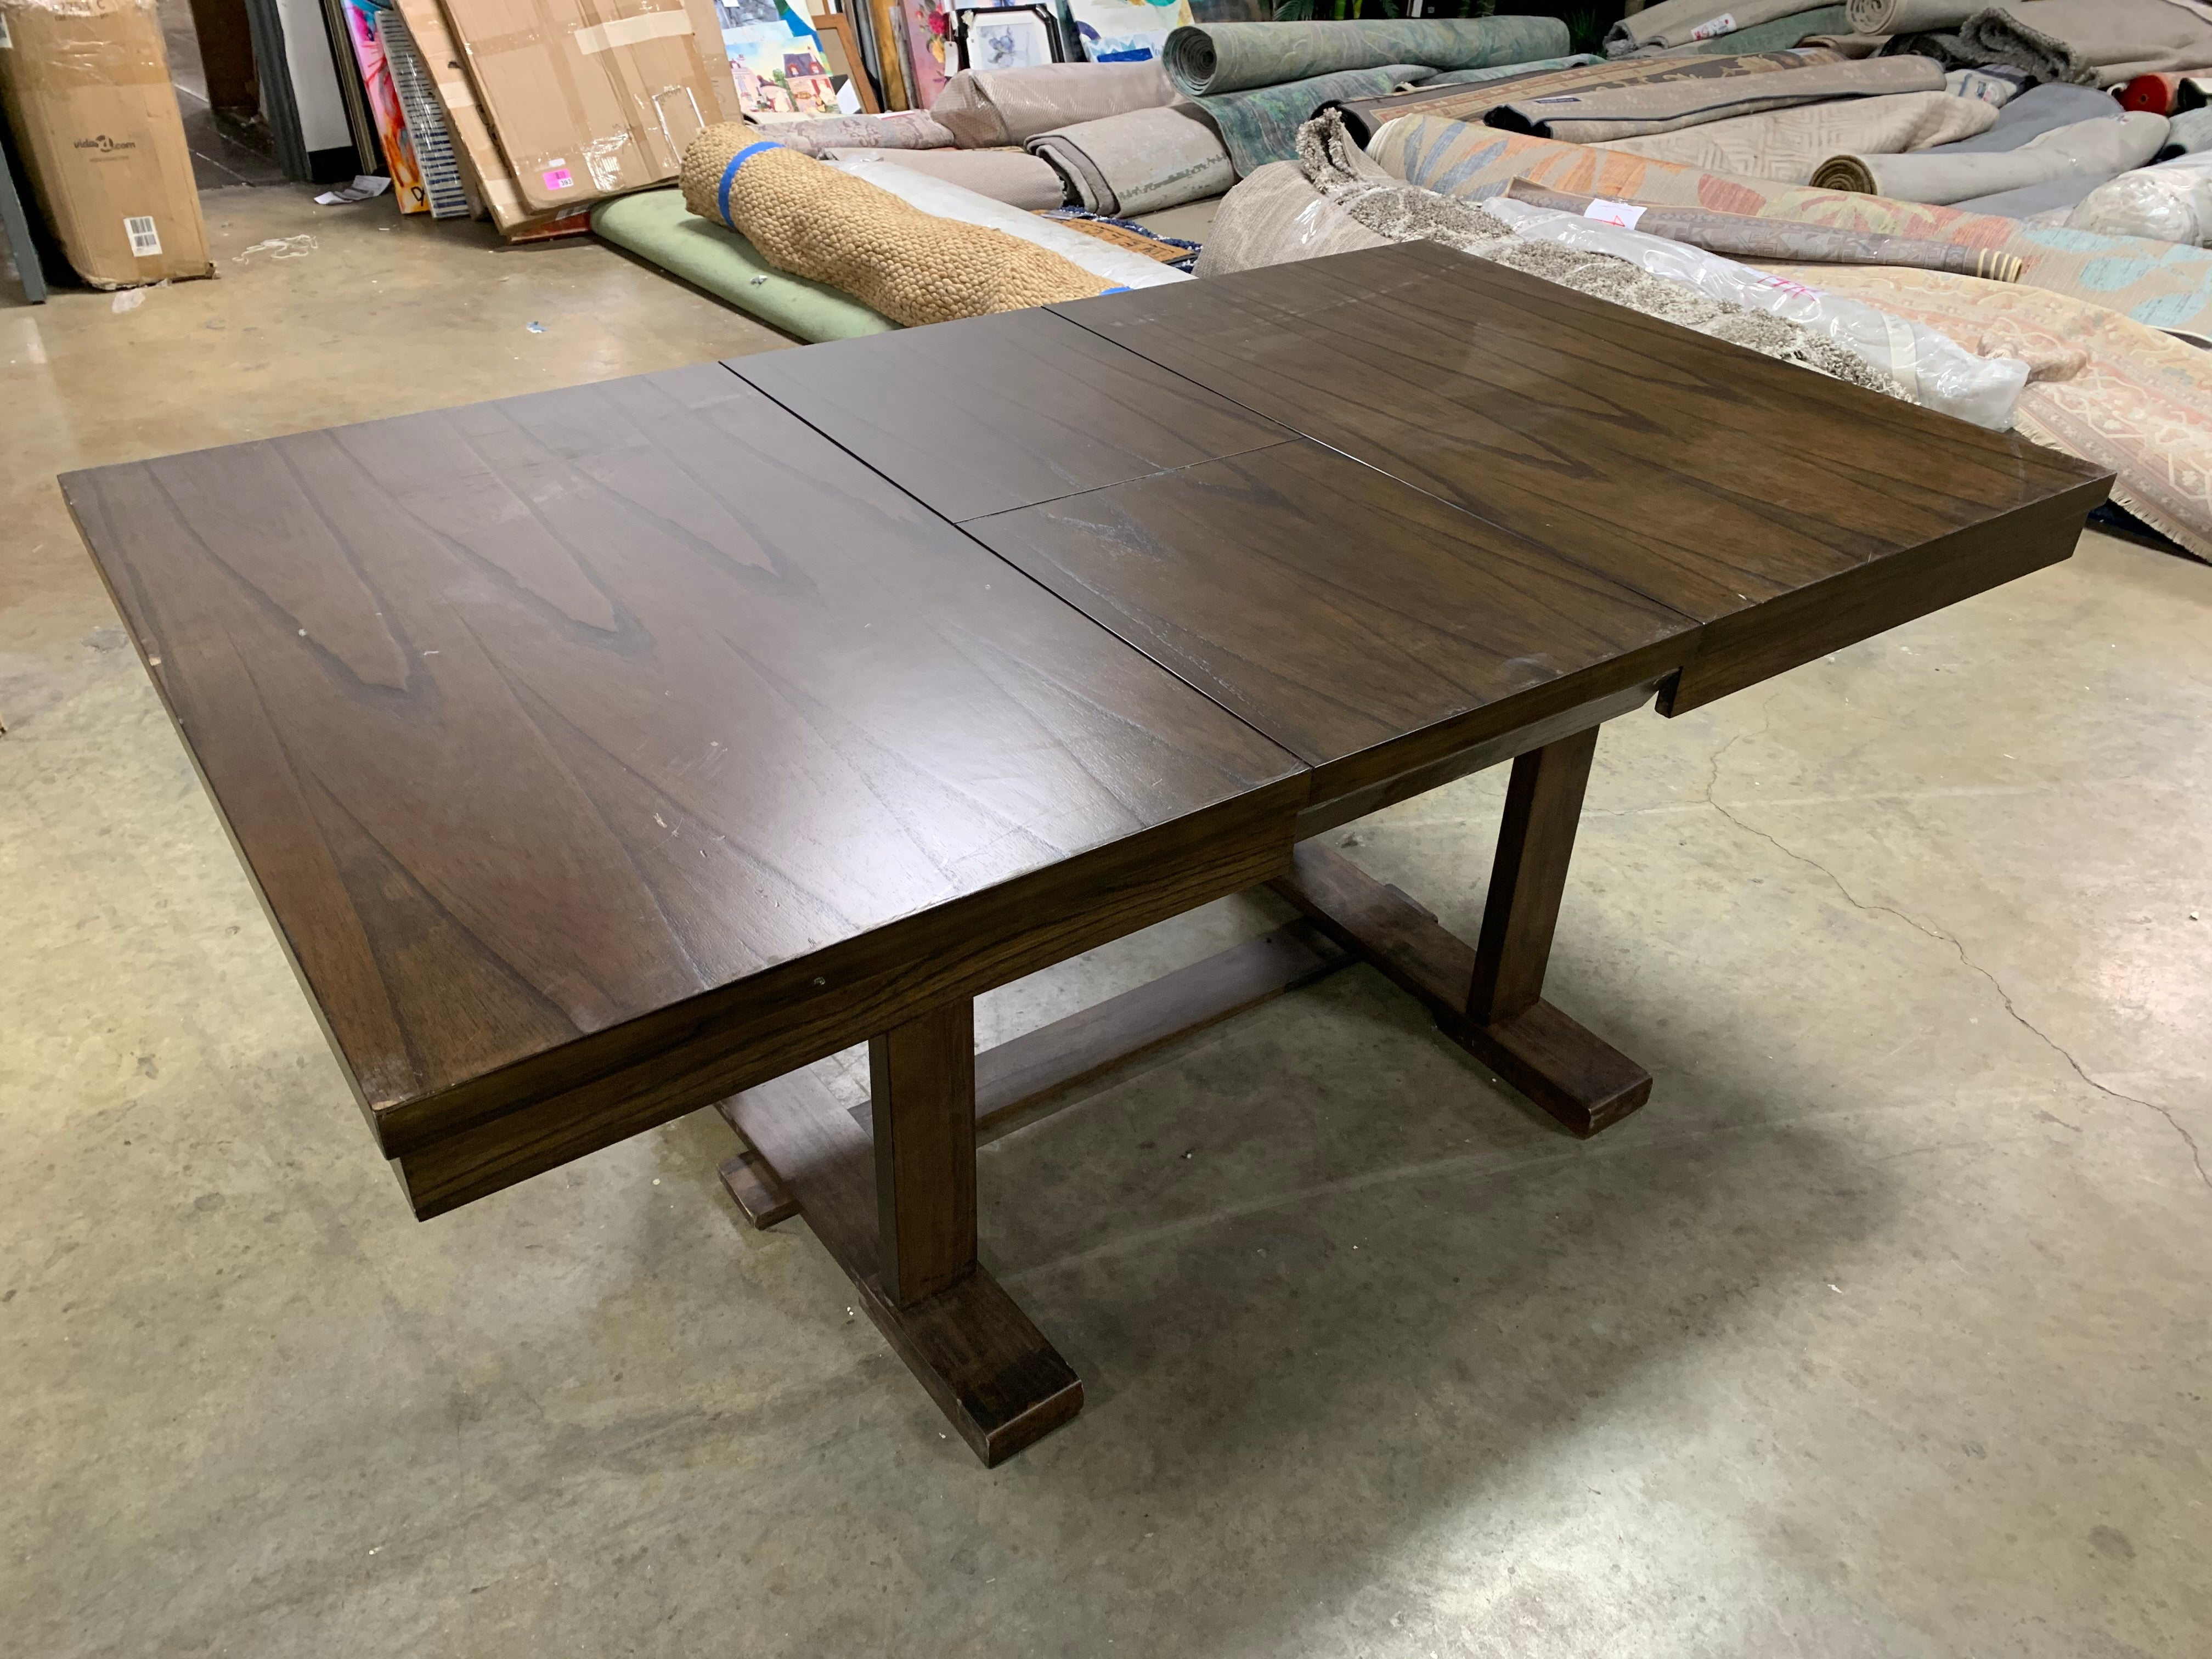 Saulsberry Dining Table *AS IS*